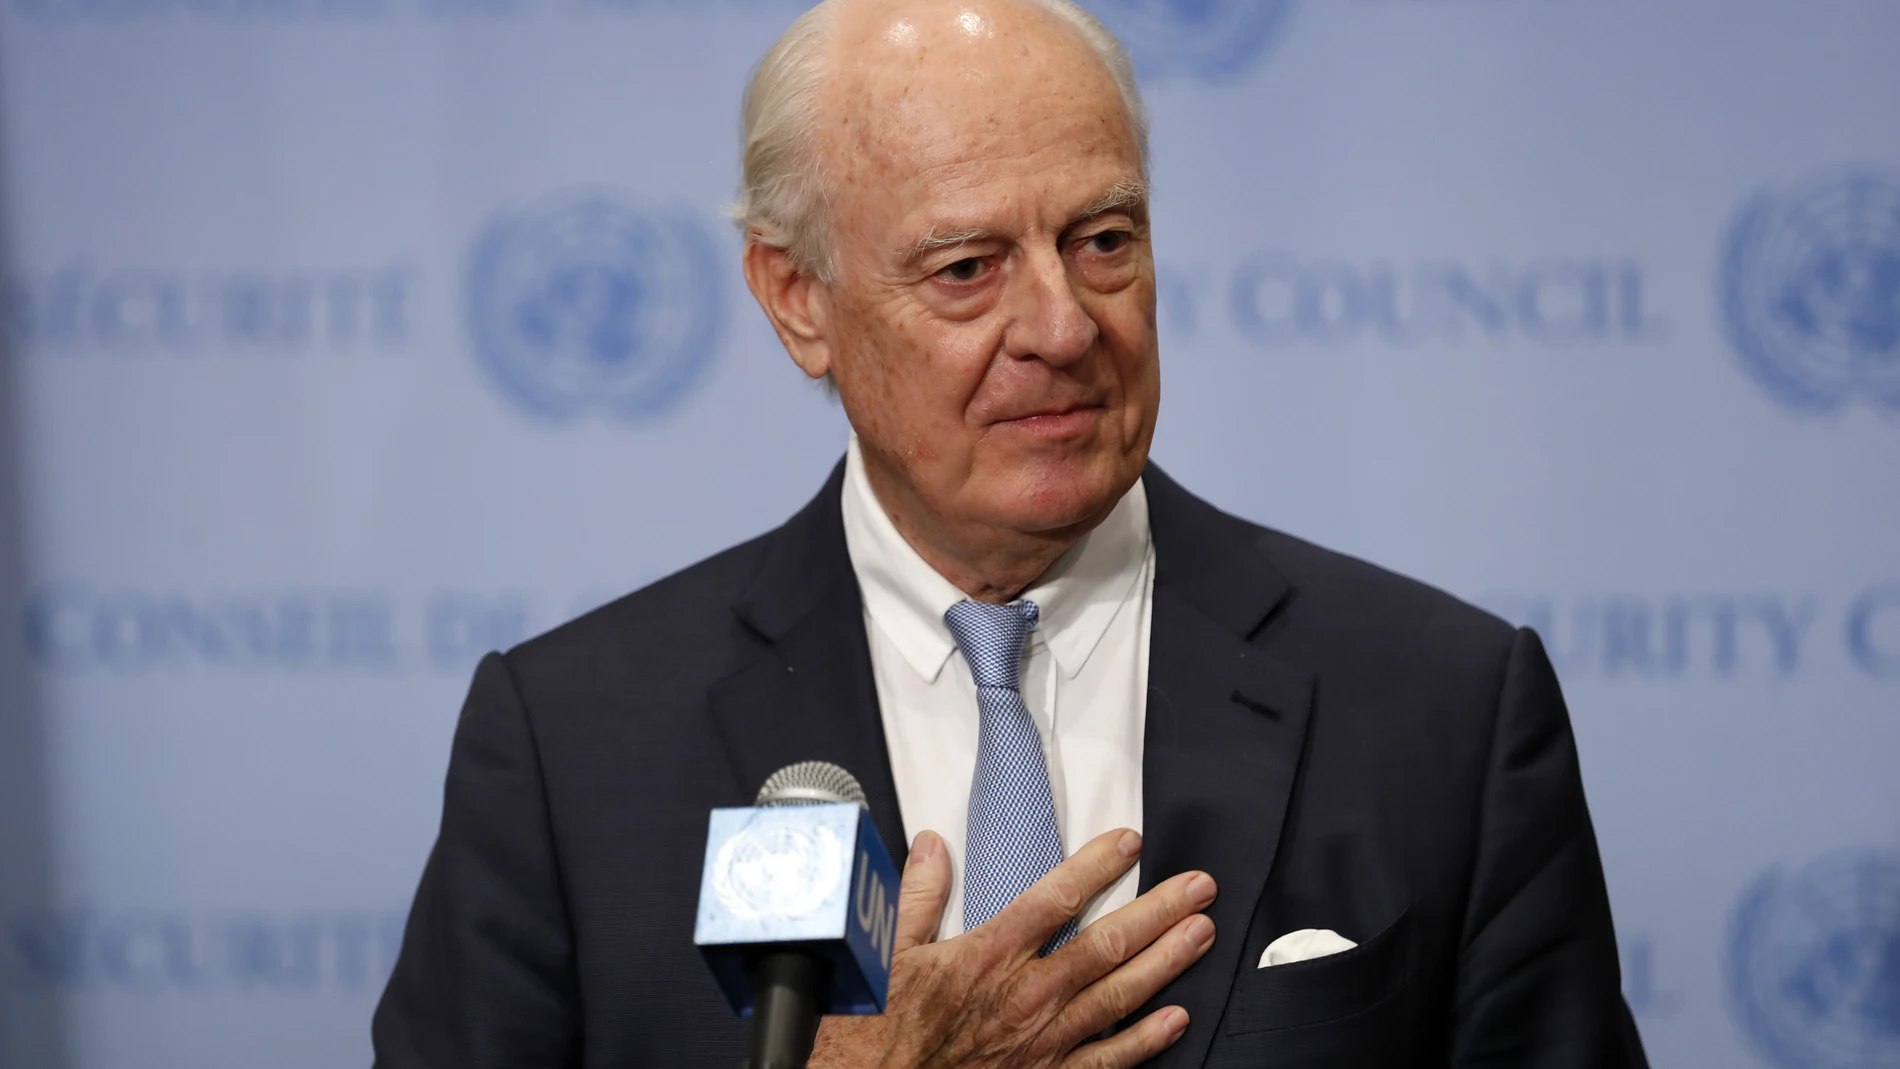 UNITED NATIONS, Dec. 20, 2018 Outgoing UN Special Envoy for Syria Staffan de Mistura speaks to journalists during a press encounter after a Security Council meeting on Syria, at the UN headquarters in New York, Dec. 20, 2018. UN Special Envoy for Syria Staffan de Mistura on Thursday received a standing ovation in the Security Council as he bid farewell. De Mistura, after four years and four months in the job, will step down by the end of the year and he will be replaced by Geir Pedersen of N...